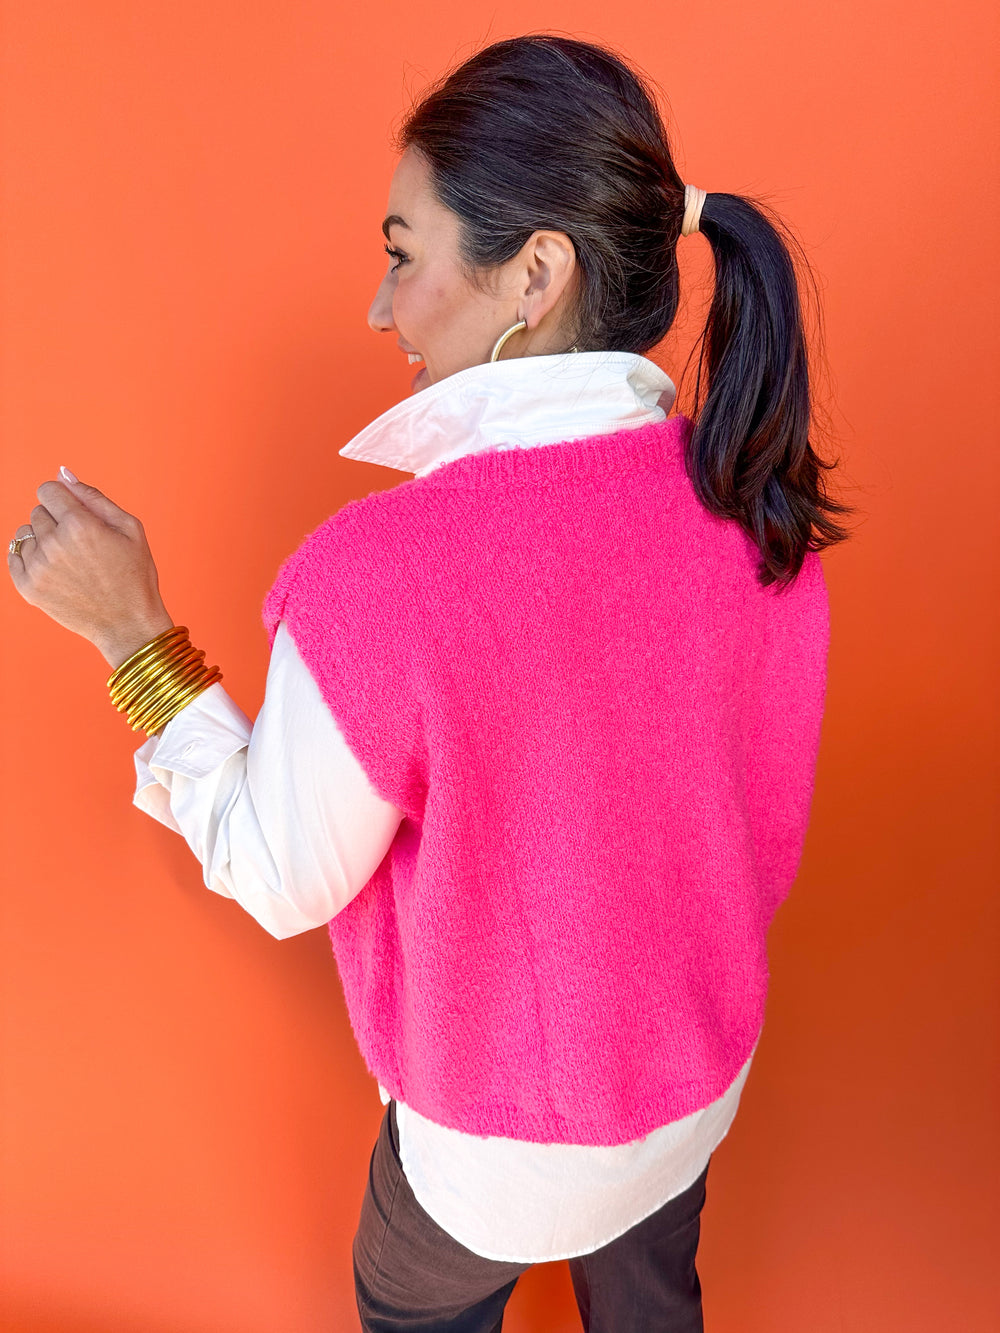 Catching Feelings Sweater Vest - Hot Pink